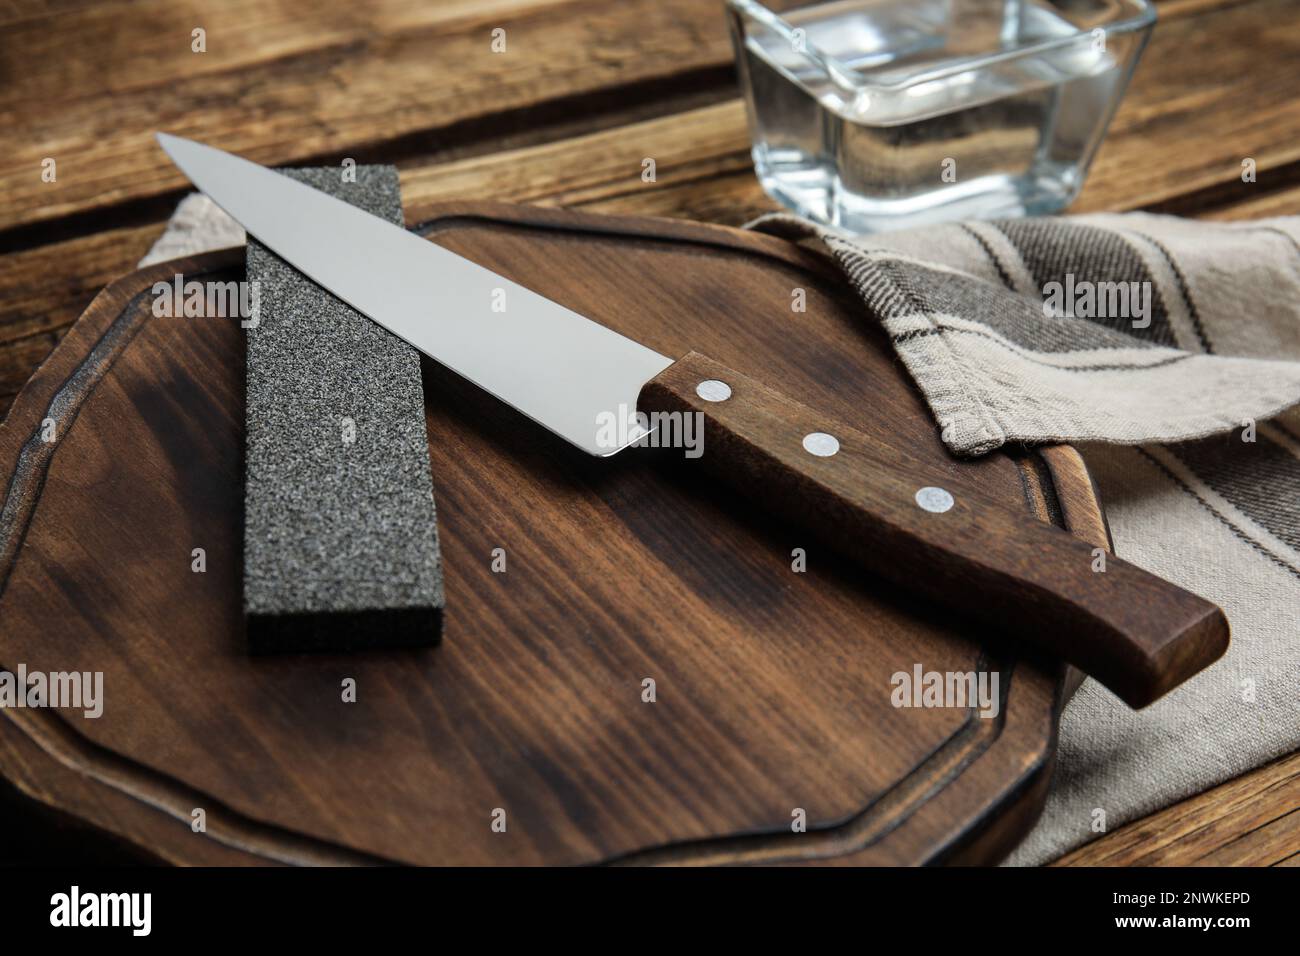 Man sharpening his pocket knife with a whetstone on a rustic wooden table  Stock Photo - Alamy